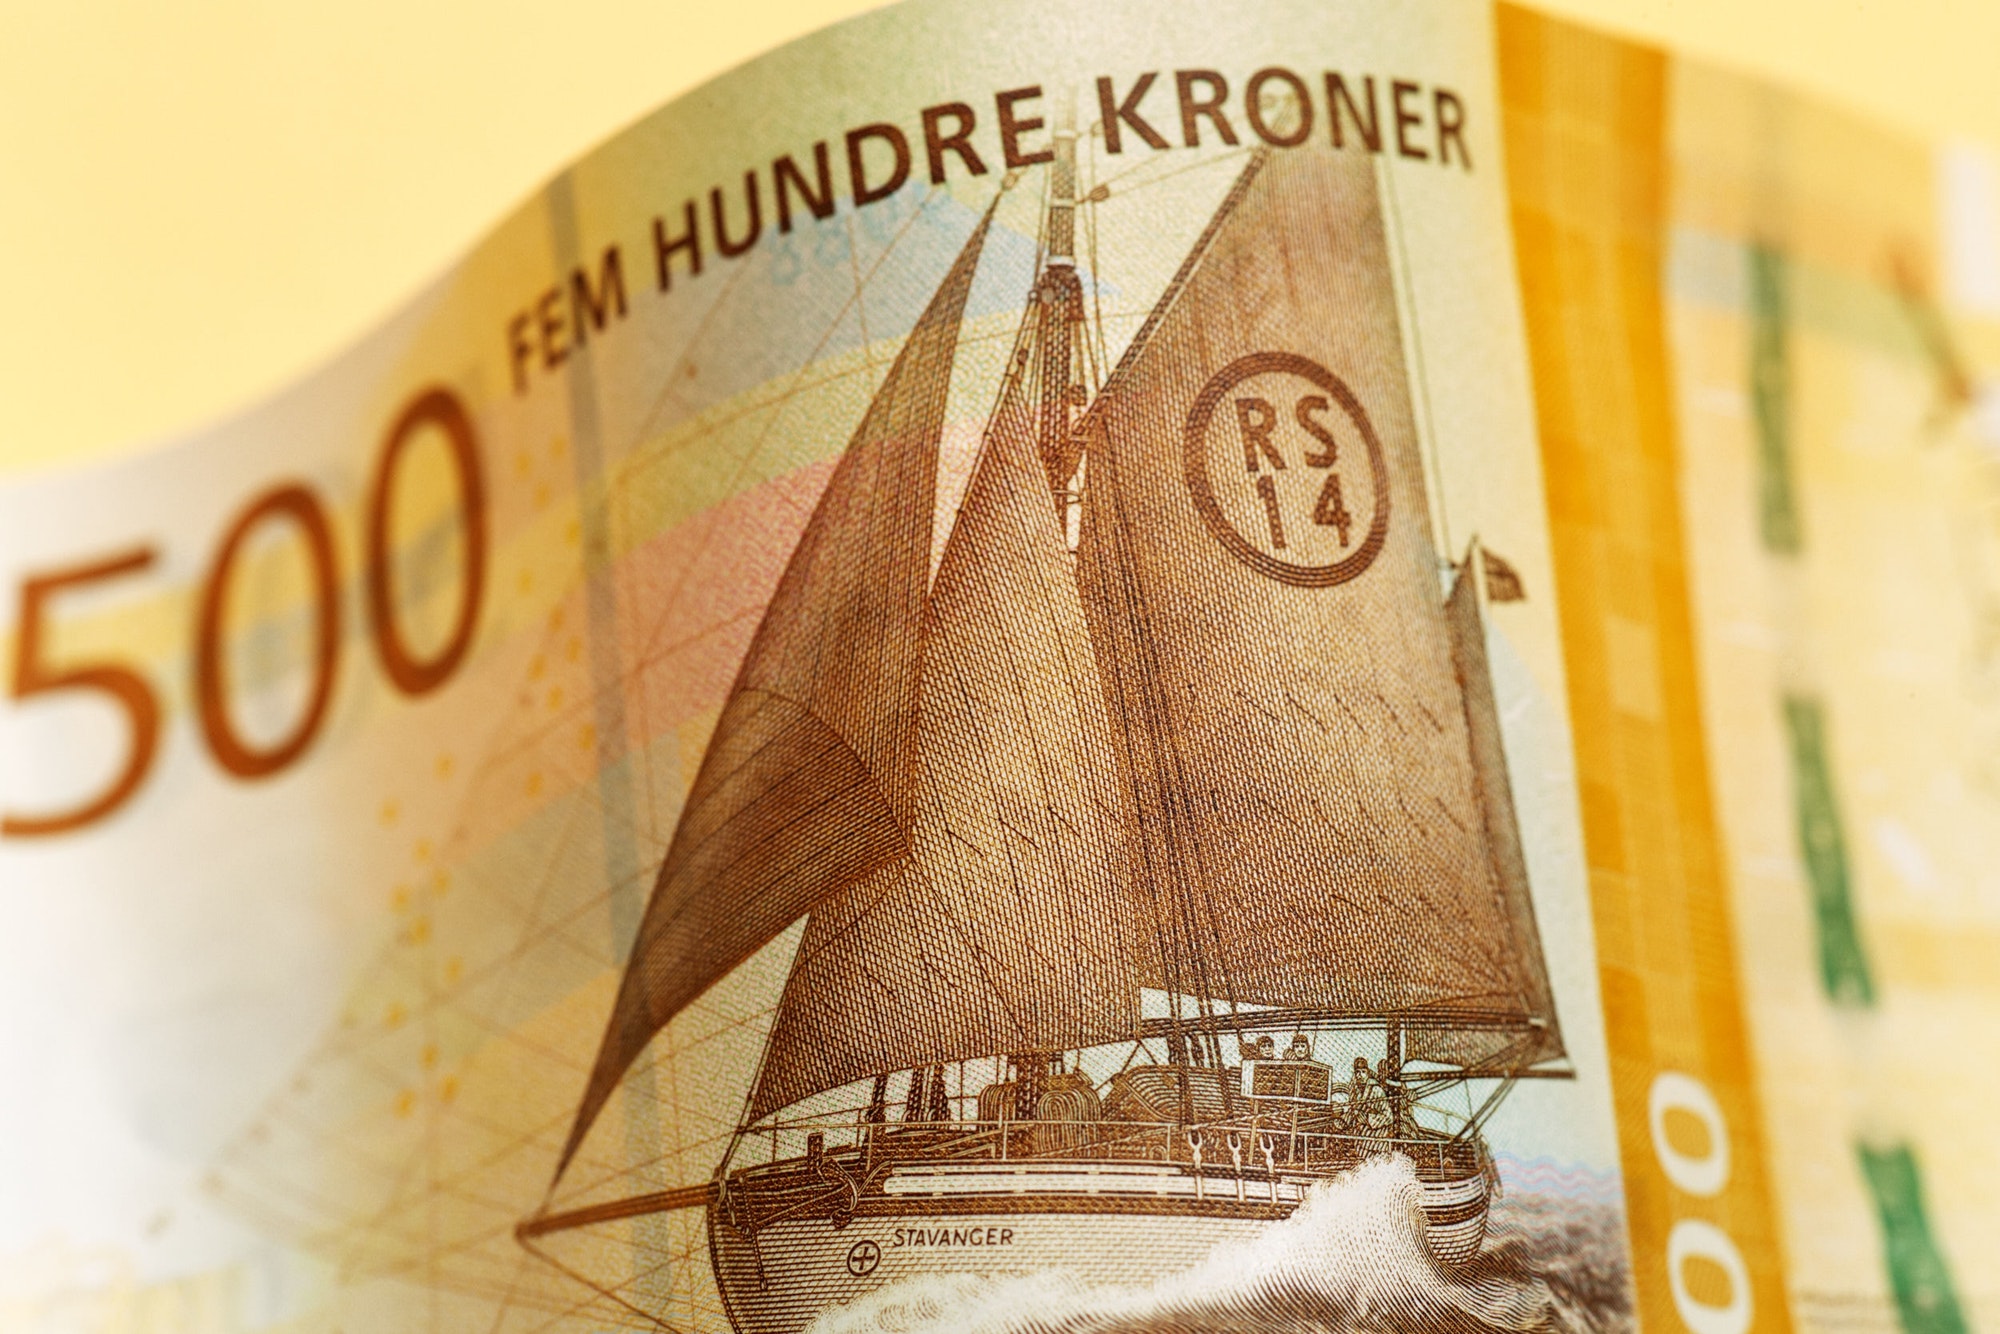 New banknotes for Norges Bank designed by The Metric System